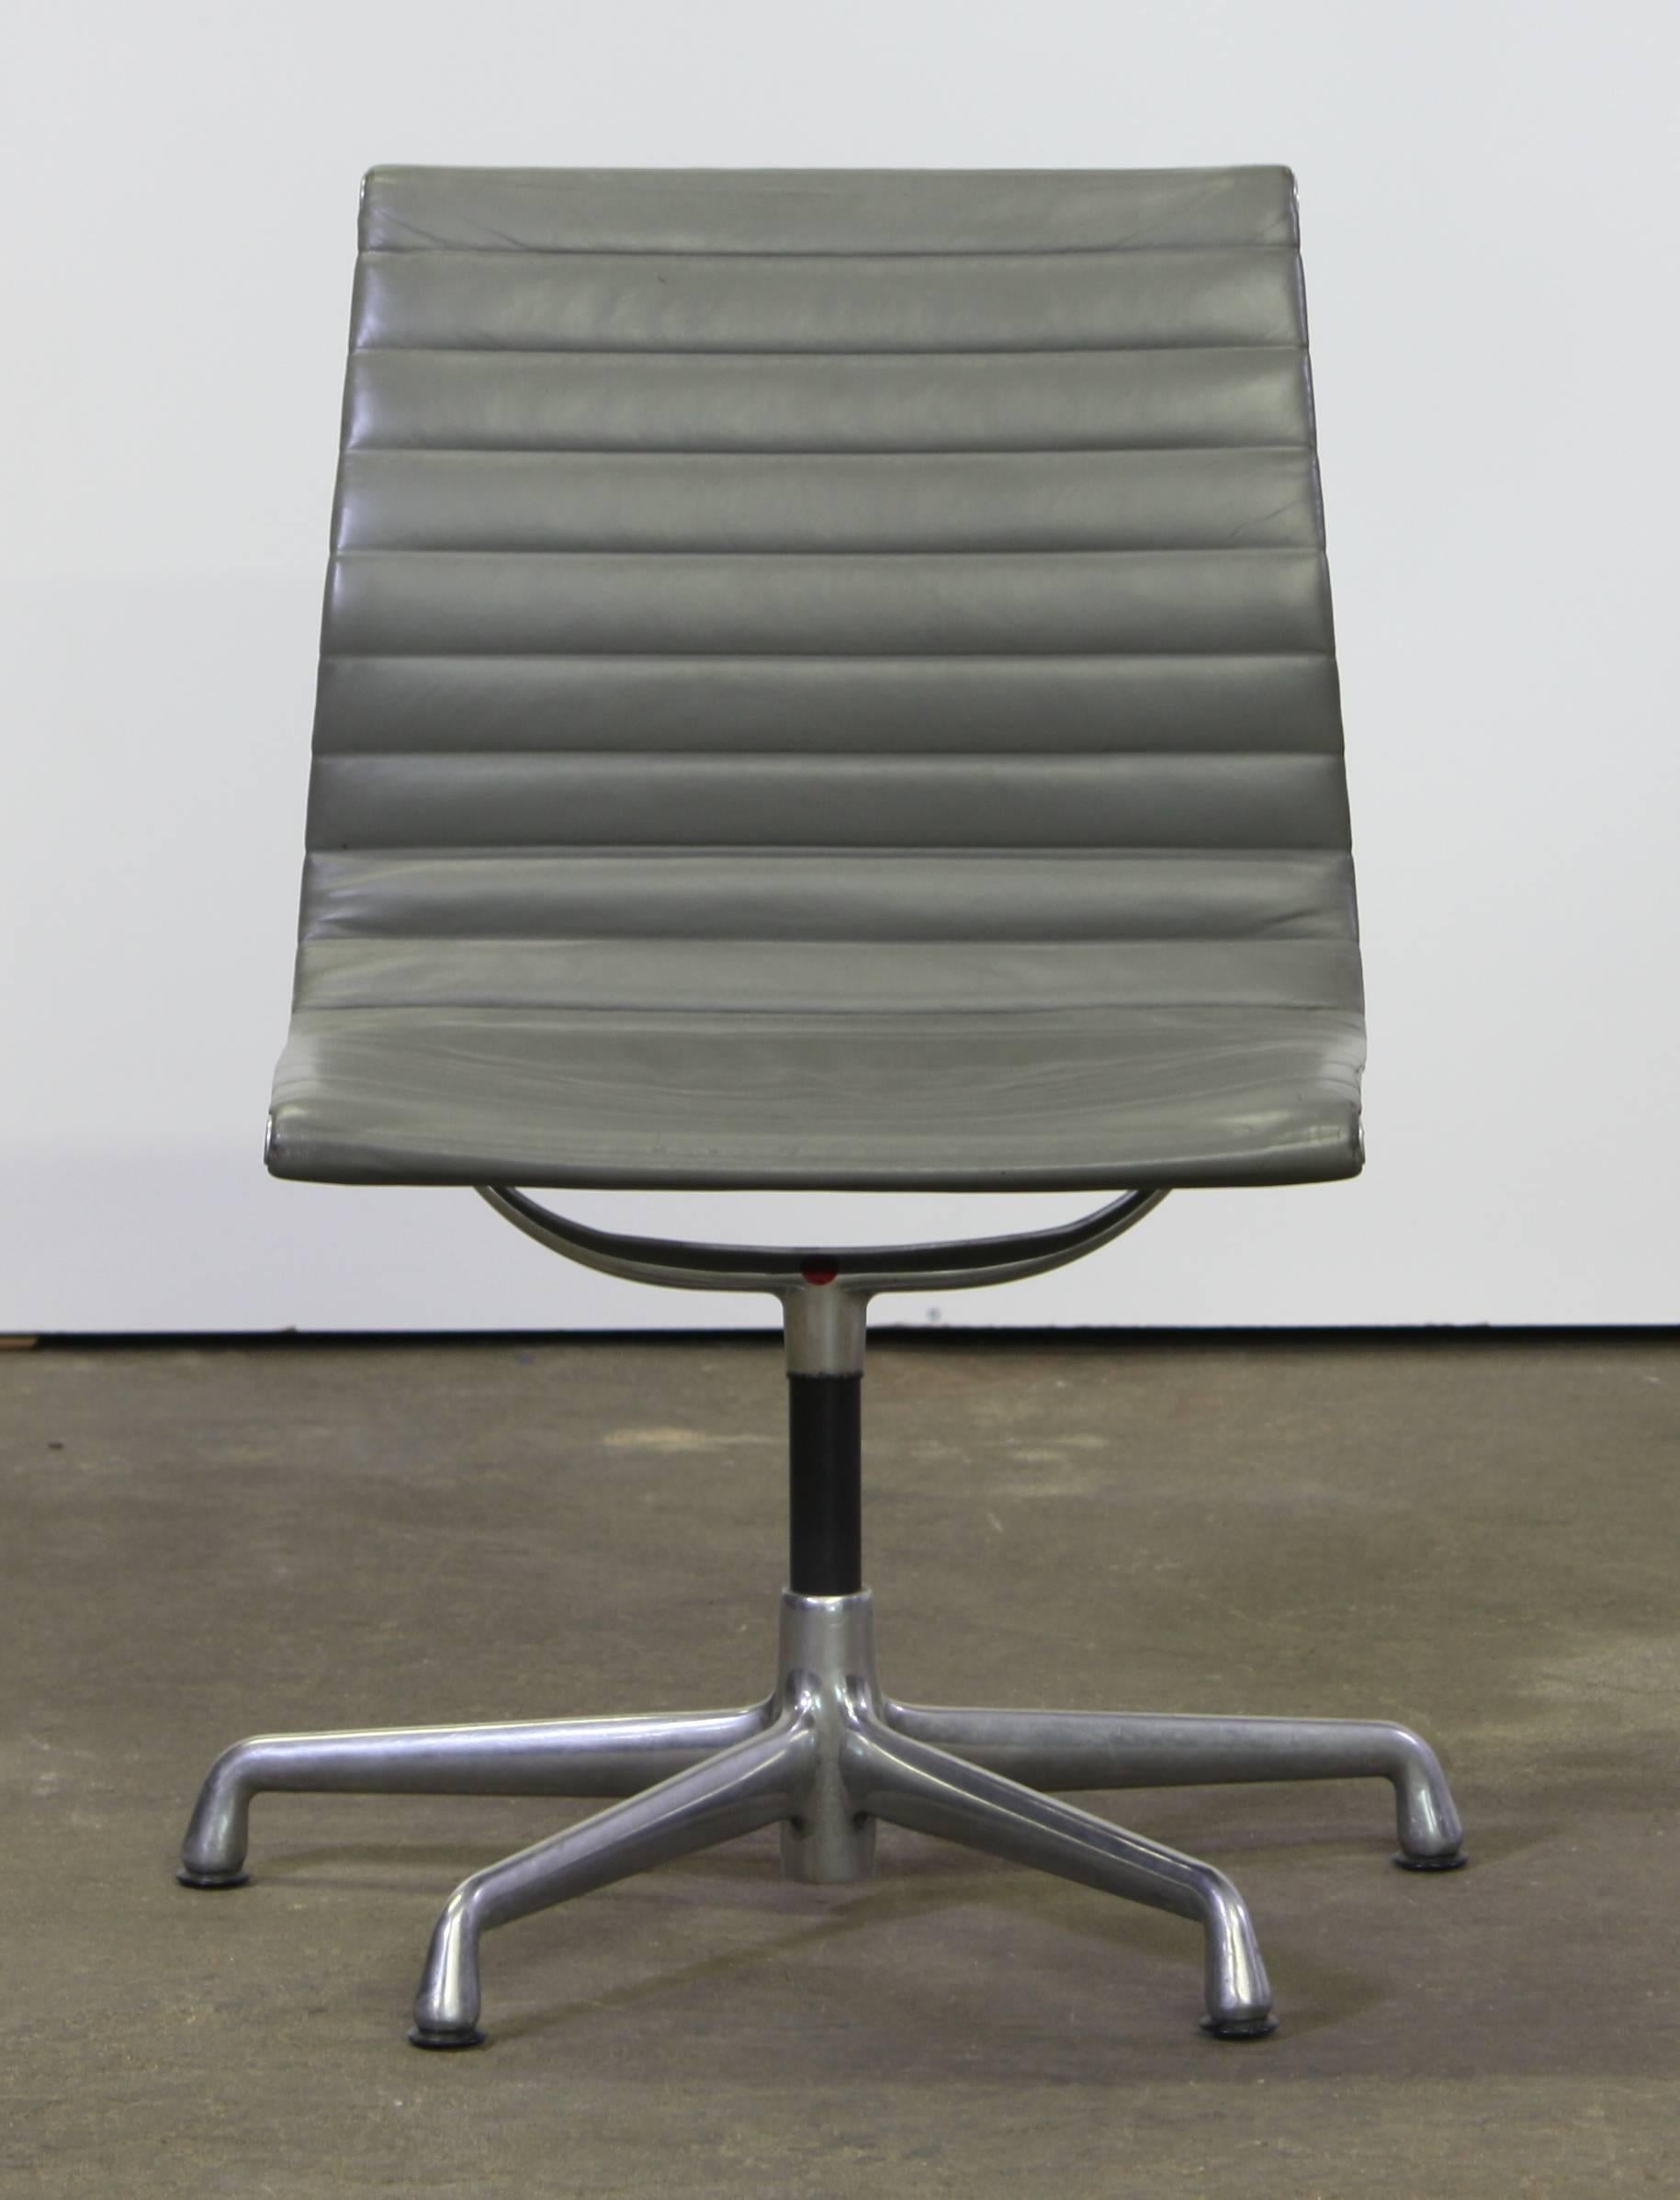 Single Herman Miller side chair designed by Charles and Ray Eames. A wonder piece for any home office.